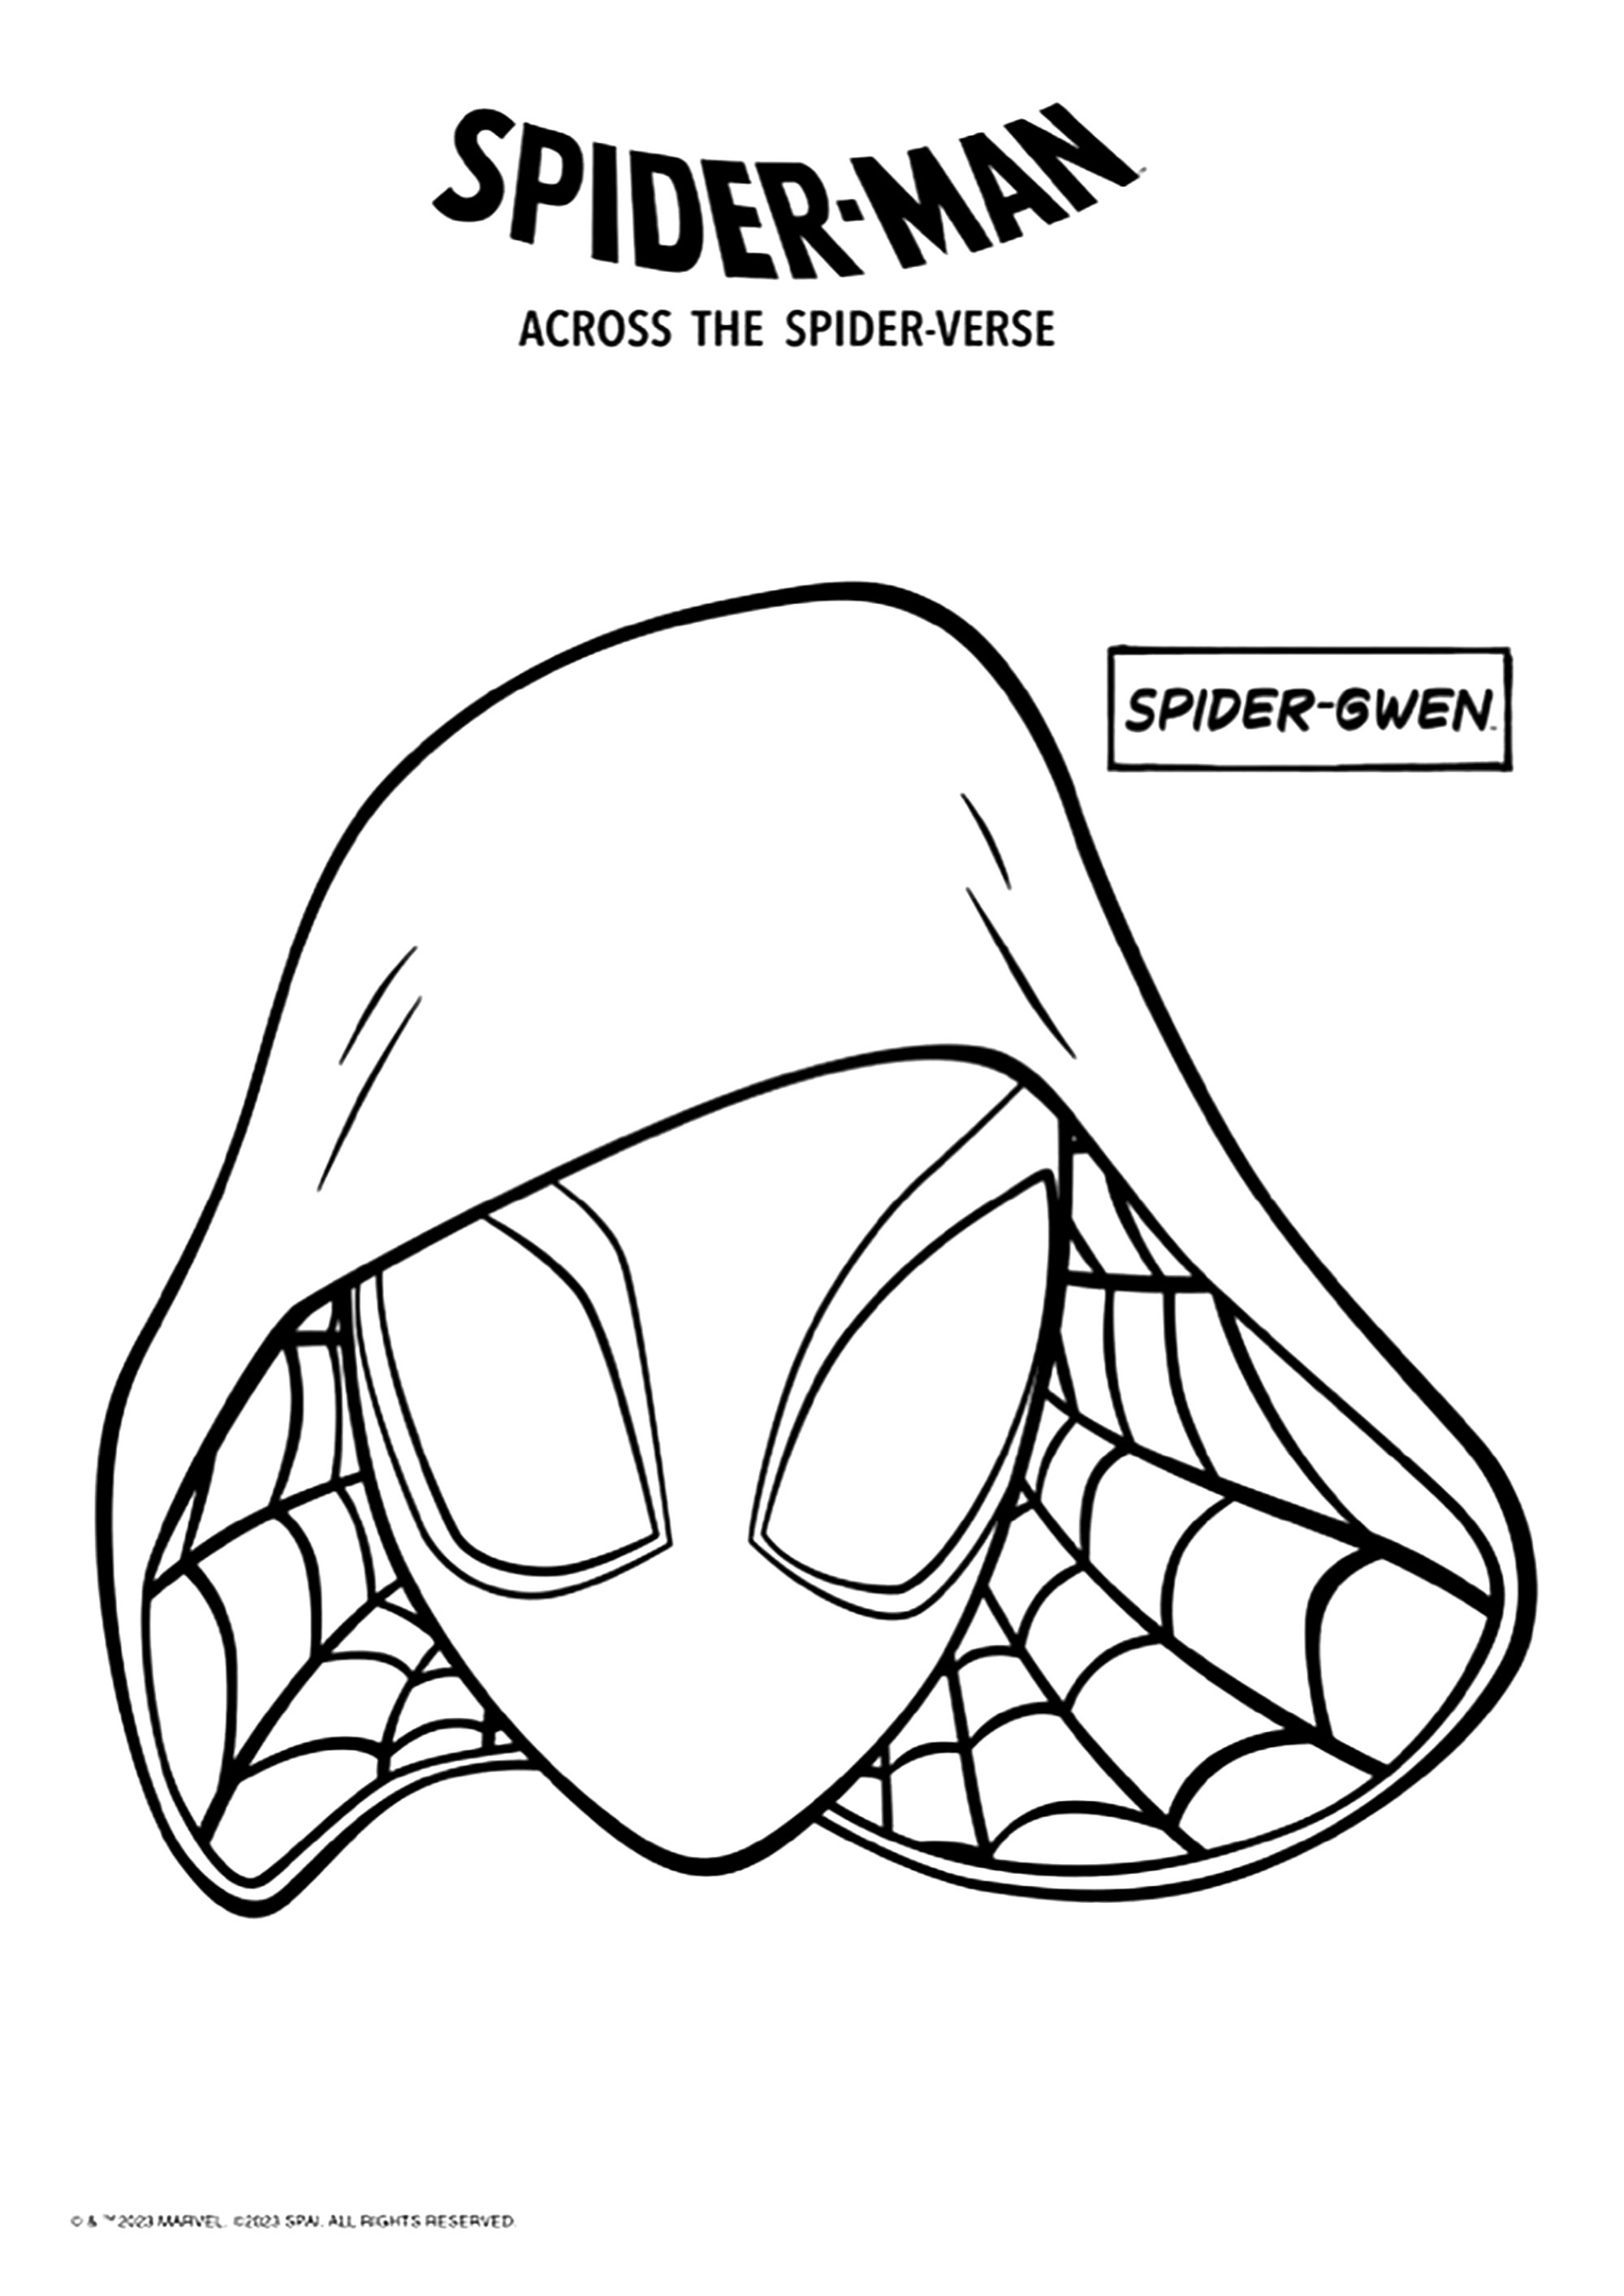 Funny Spider-Man : Across the Spider-Verse coloring page